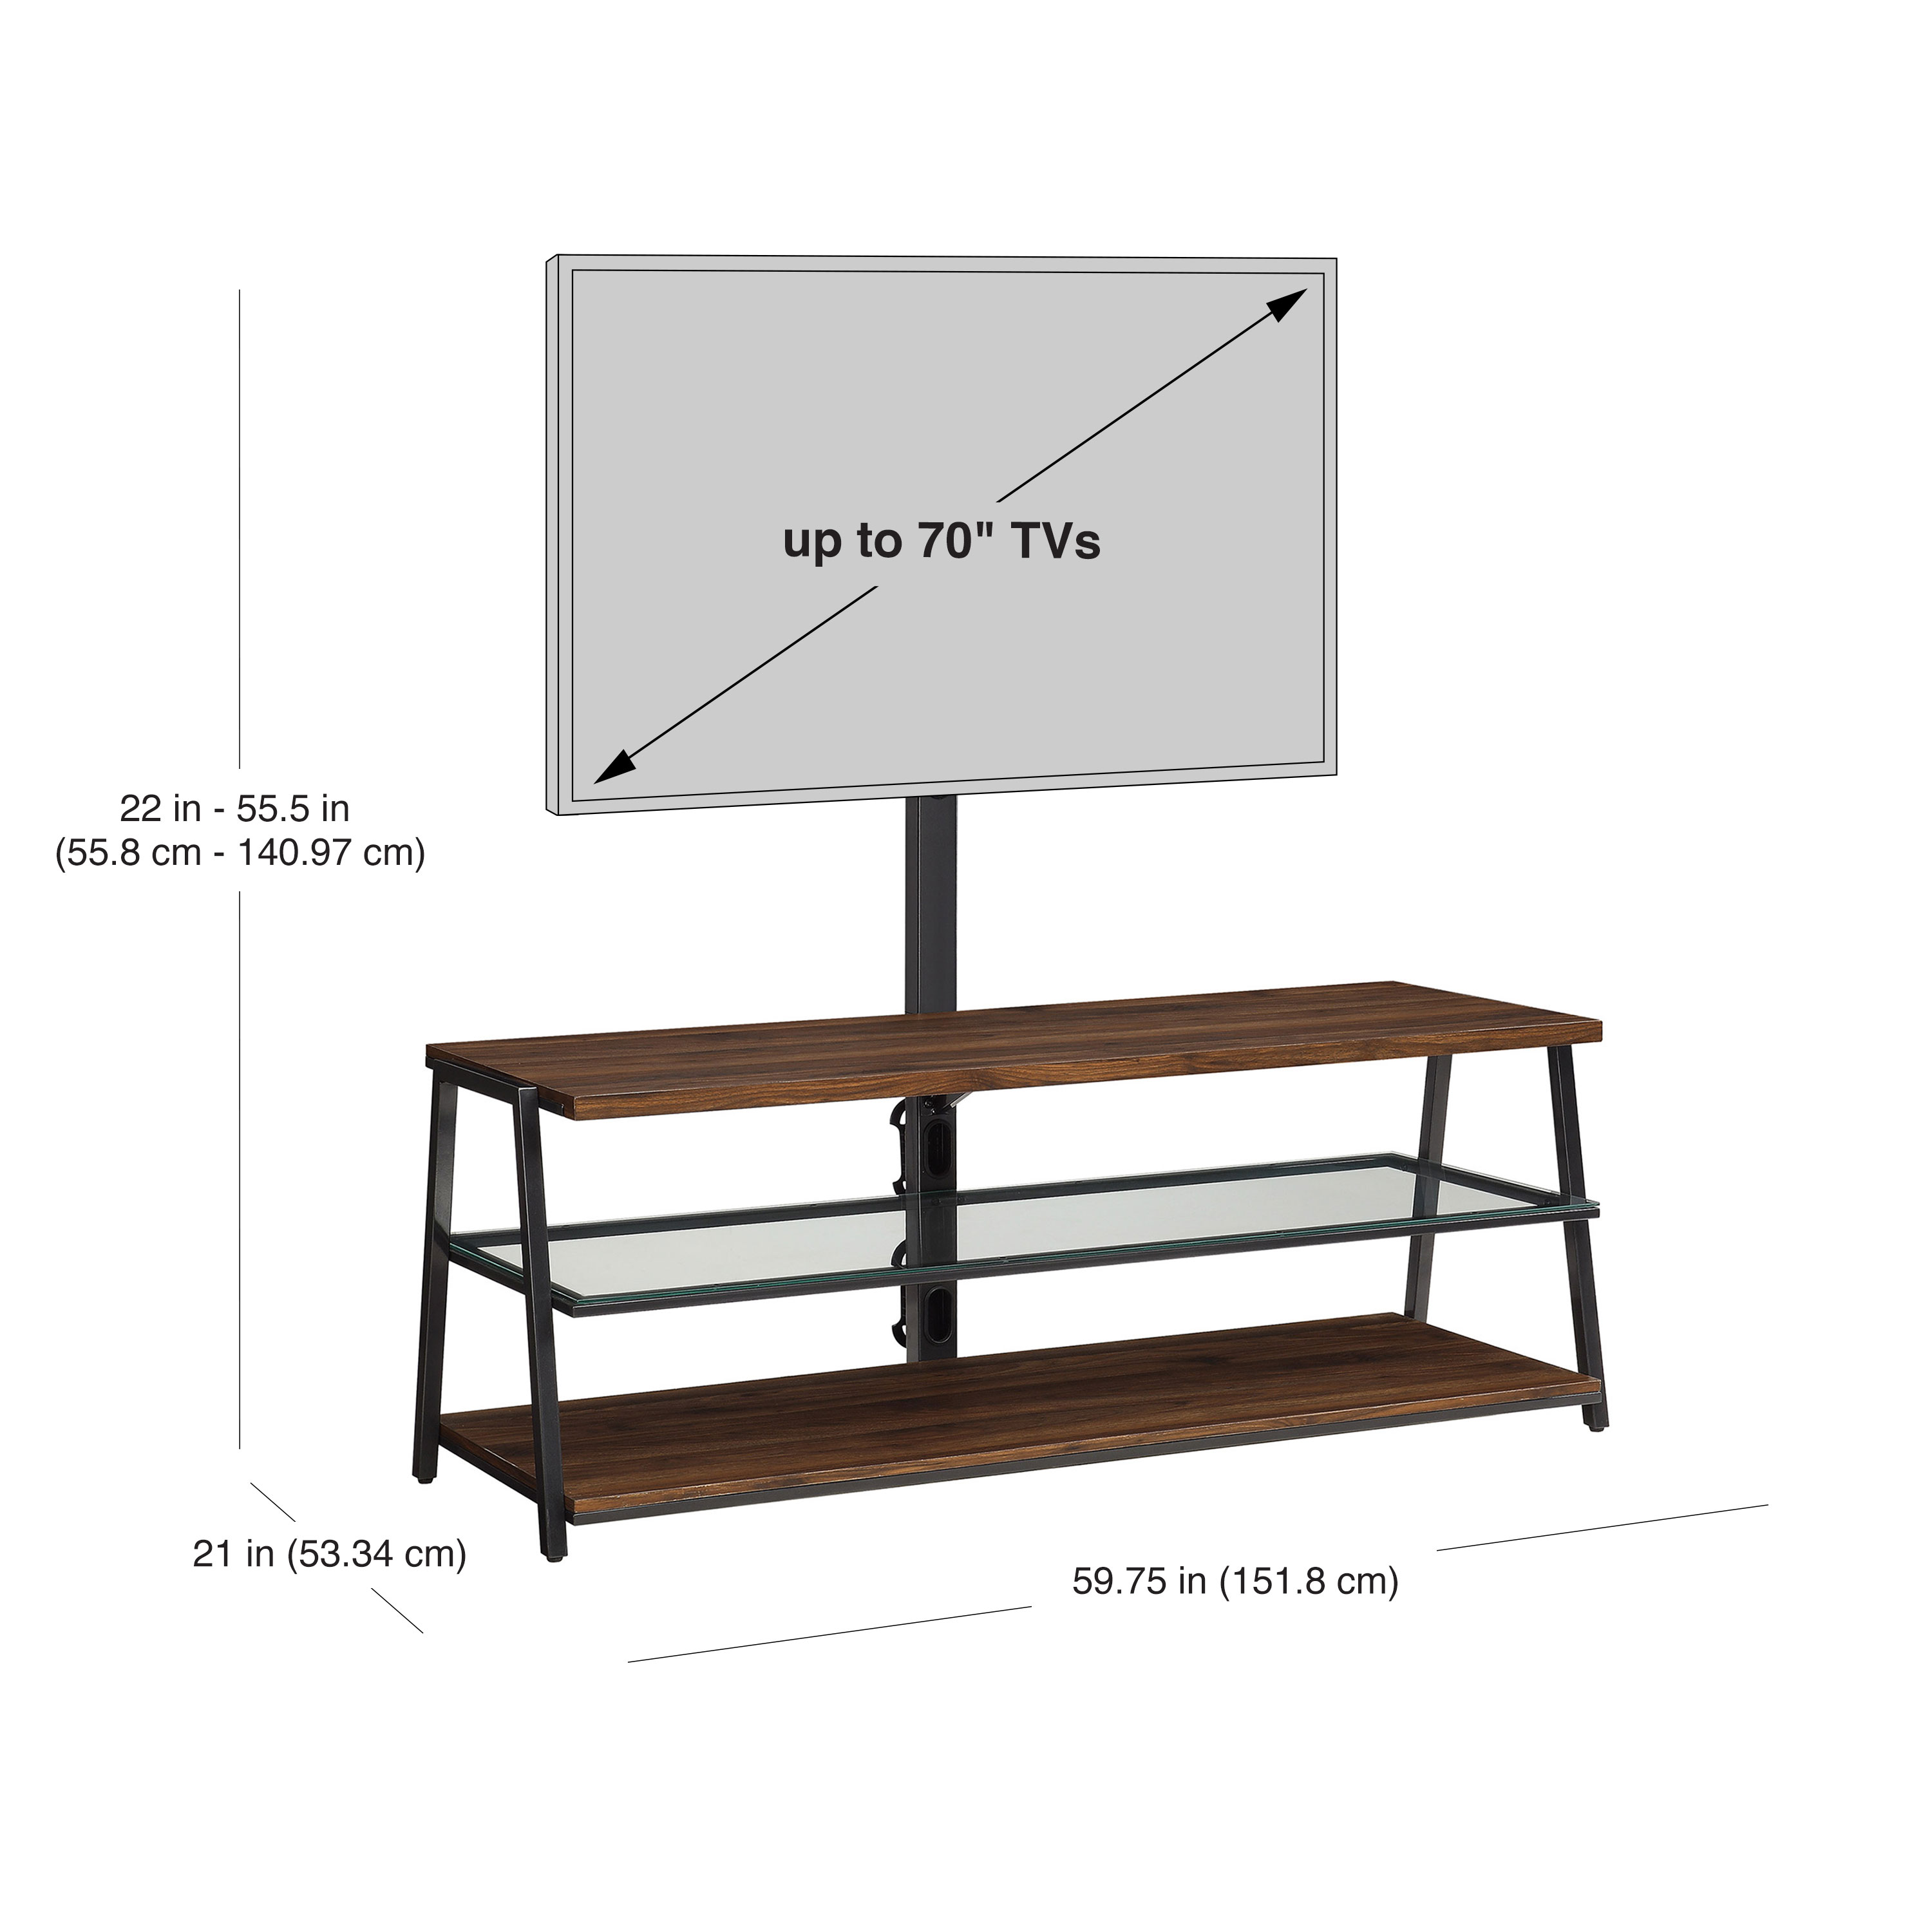 Mainstays Arris 3-in-1 TV Stand for TVs up to 70